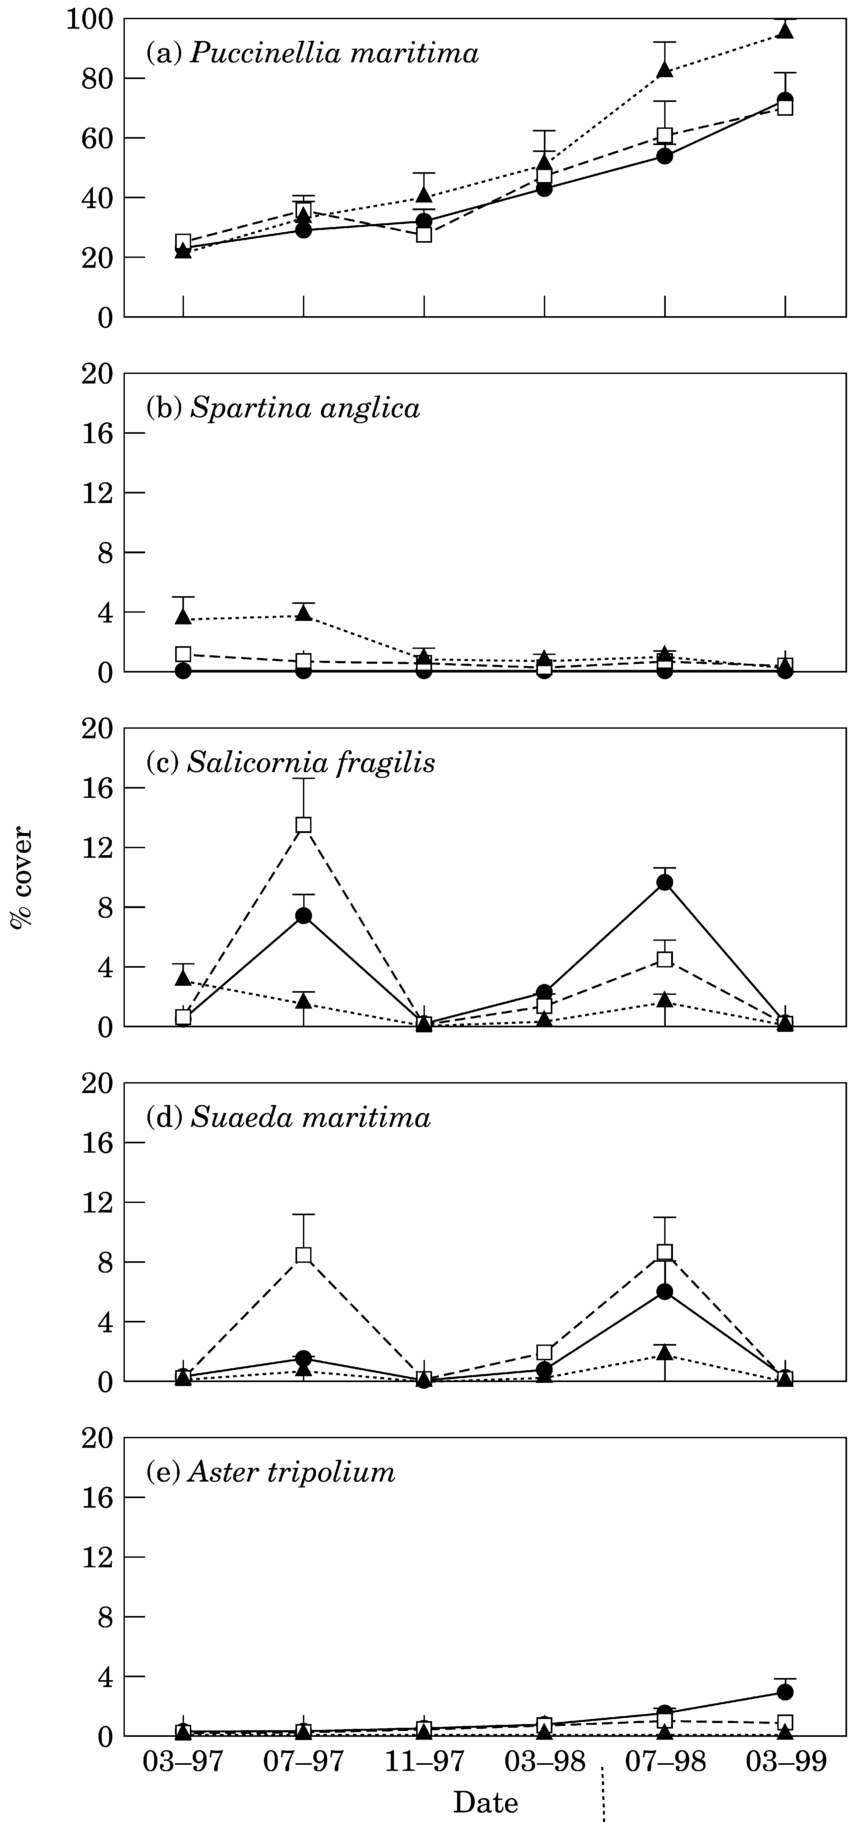 Change in the vegetation cover (%+SE) on the hummock of the micro-topography of the three sites, from March 1997 to March 1999. d, Site 1; Ã, Site 2; m, Site 3.